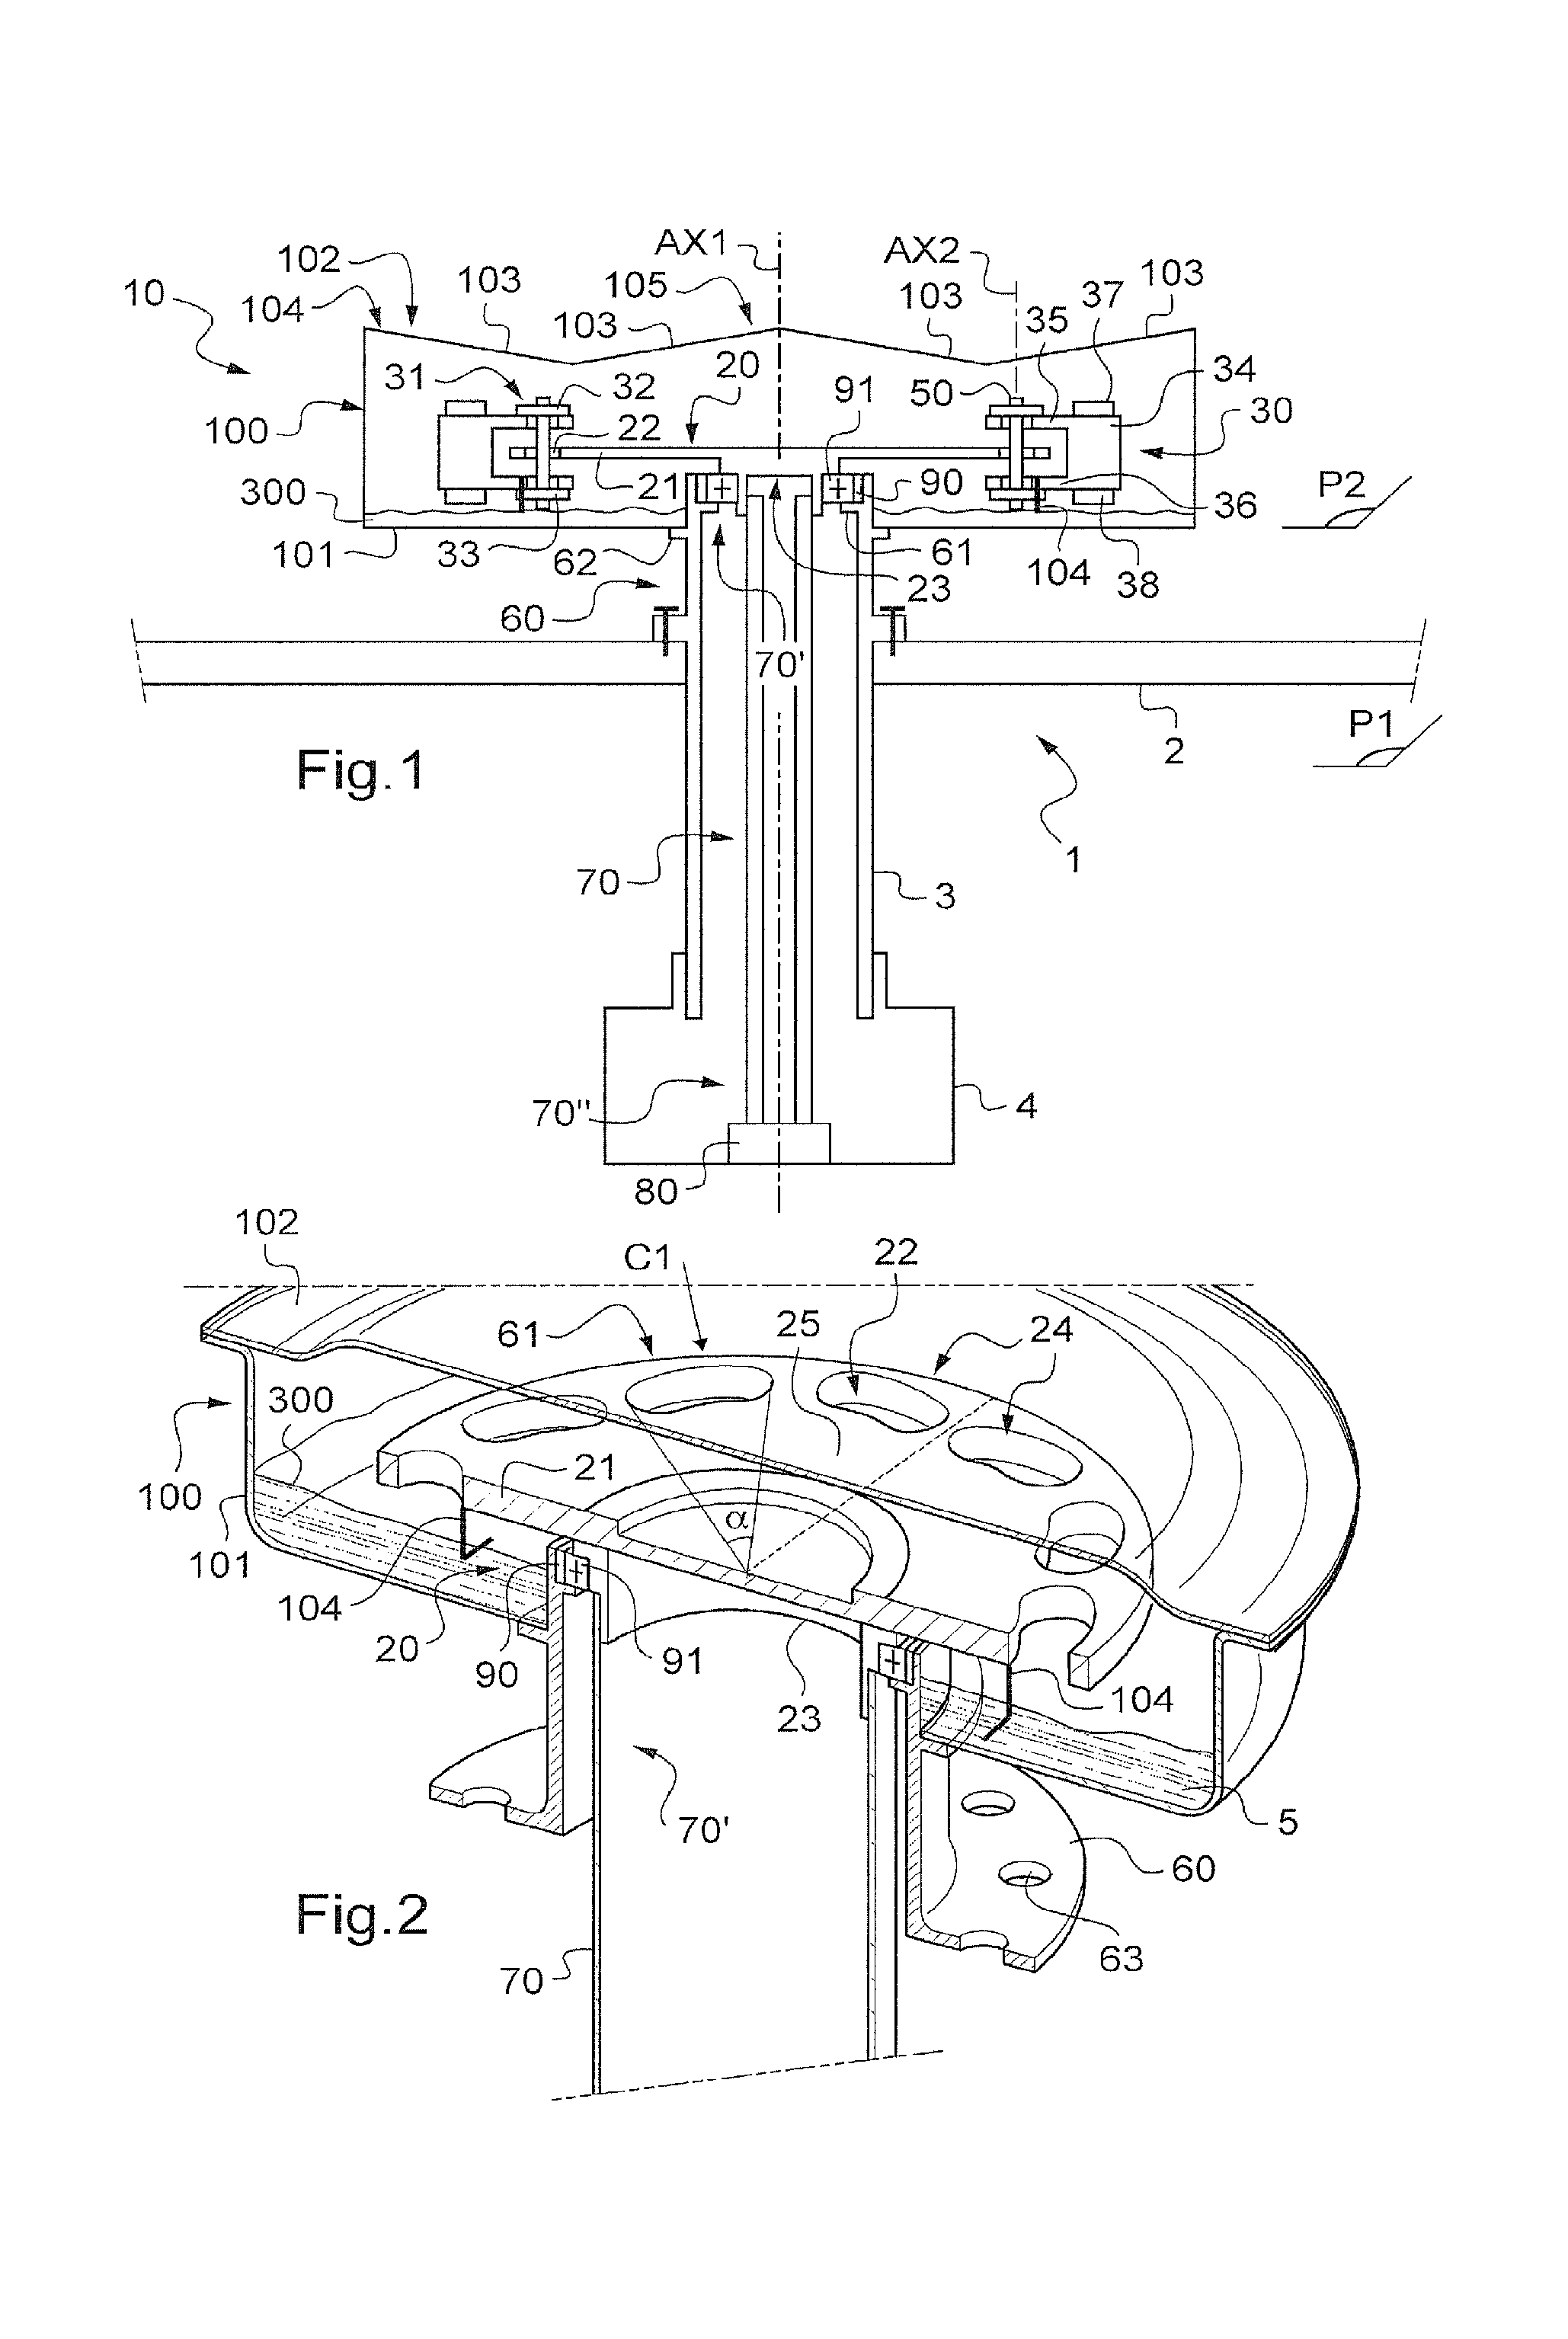 Device for reducing vibration generated by rotorcraft rotor, and rotorcraft provided with such device